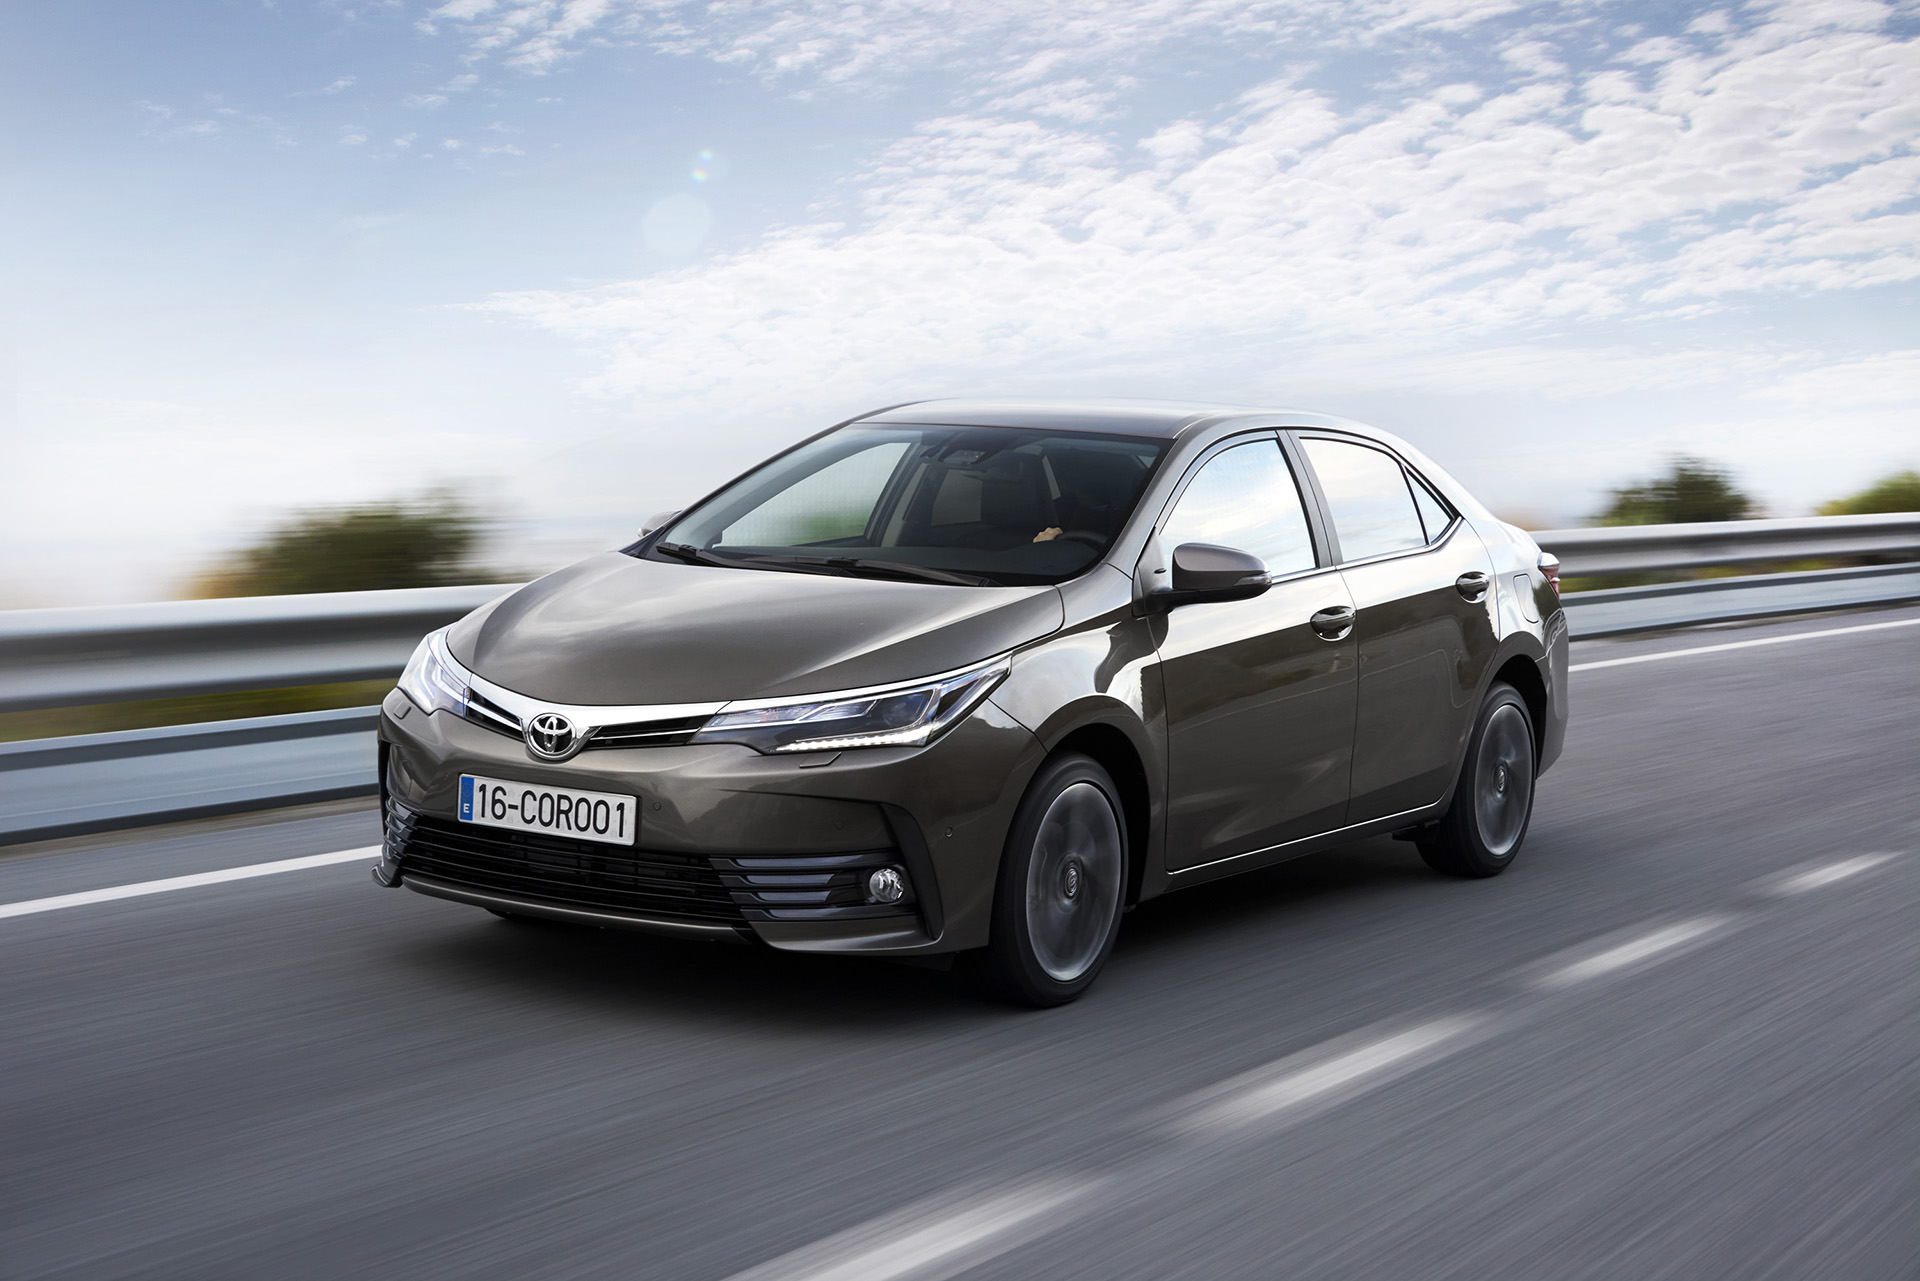 Europe - The 11th Generation Corolla (since 2013)